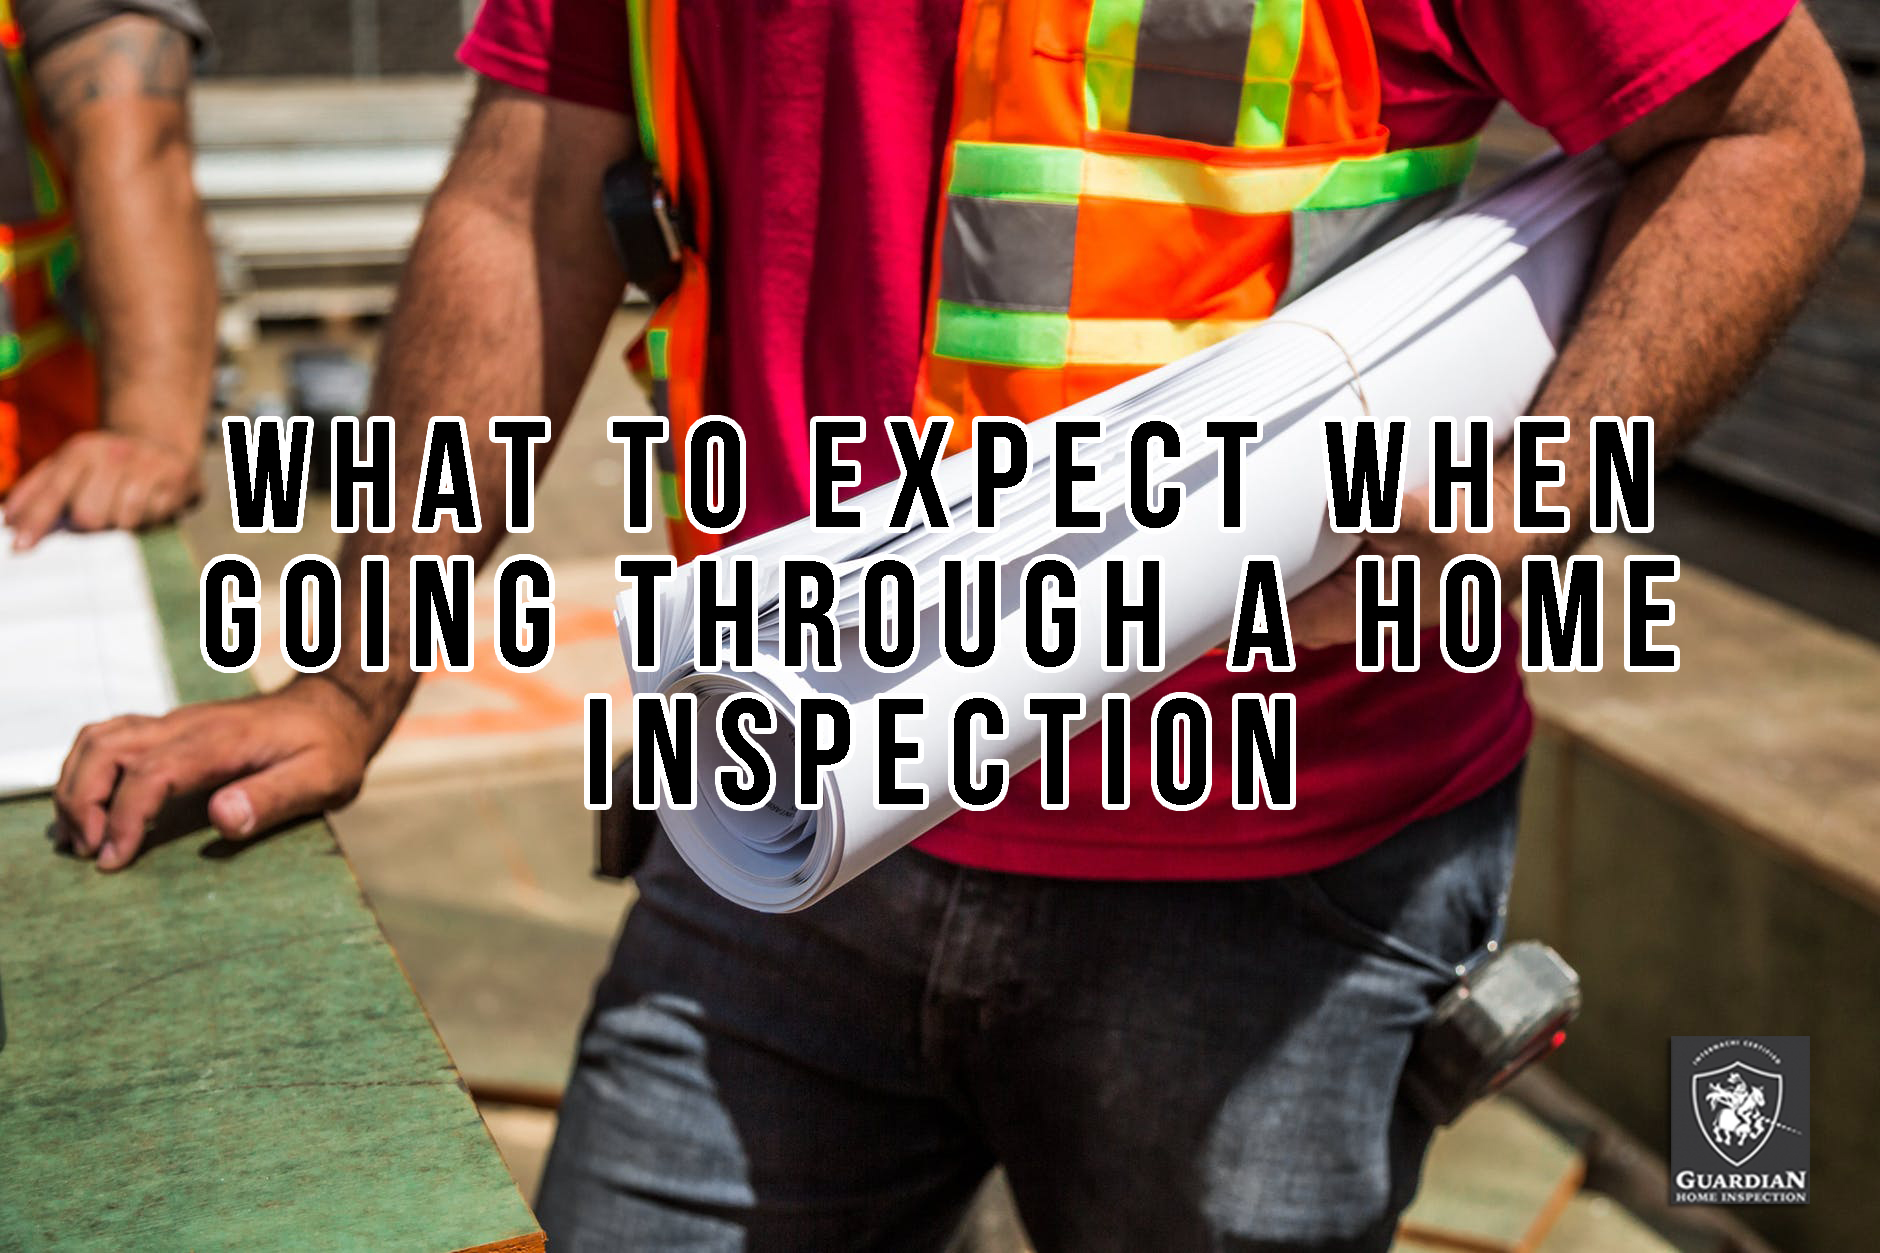  what to expect during a home inspection